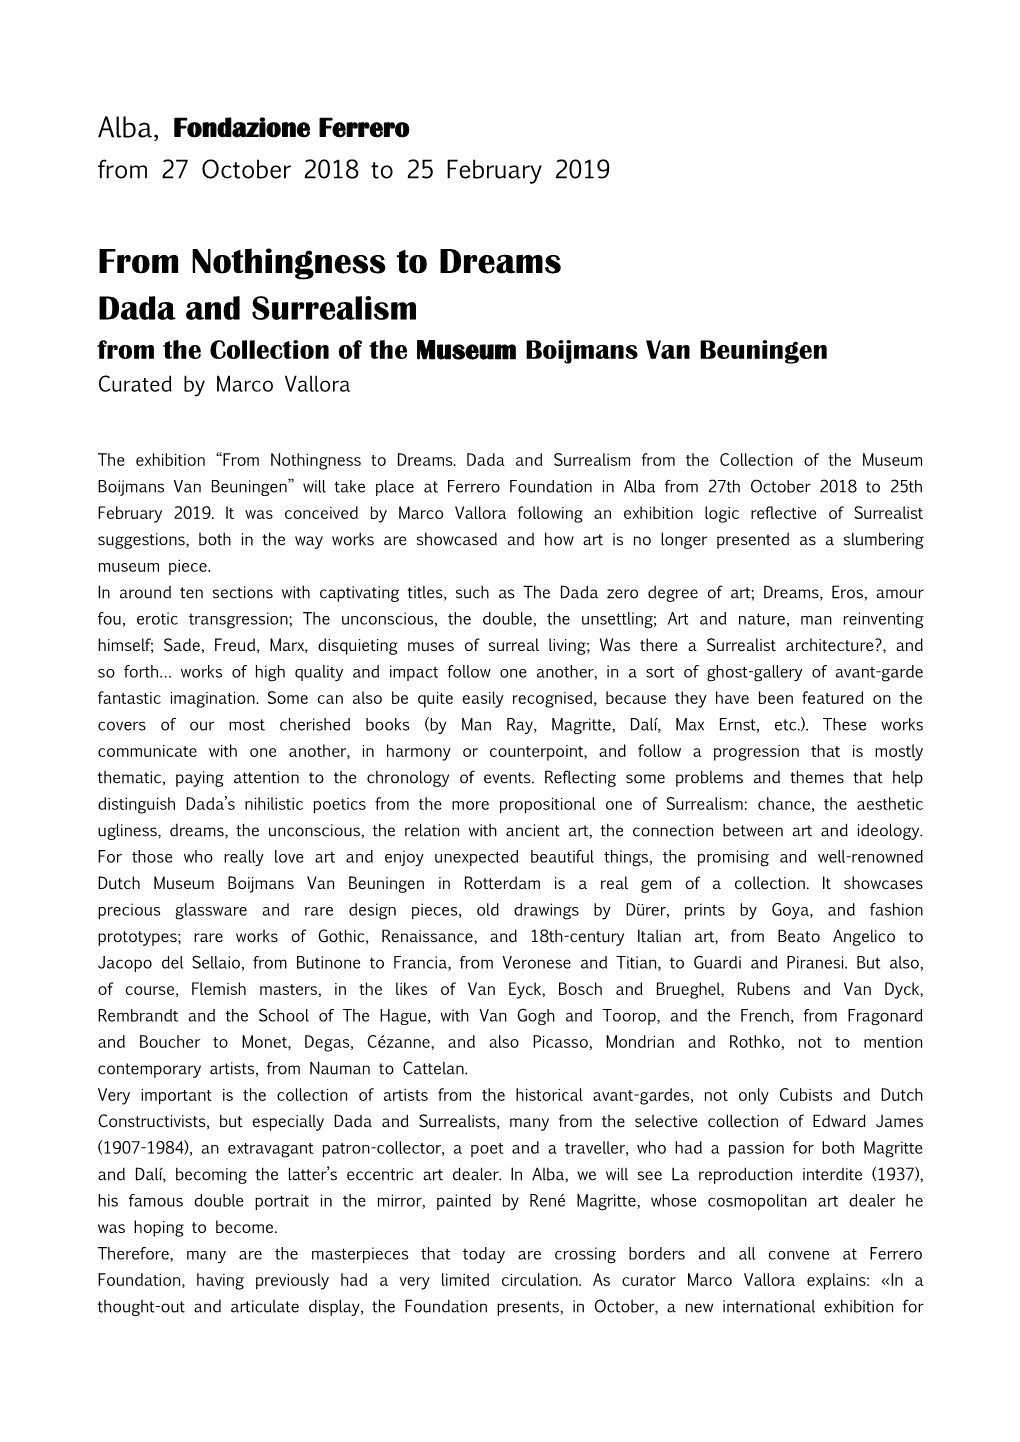 From Nothingness to Dreams Dada and Surrealism from the Collection of the Museum Boijmans Van Beuningen Curated by Marco Vallora